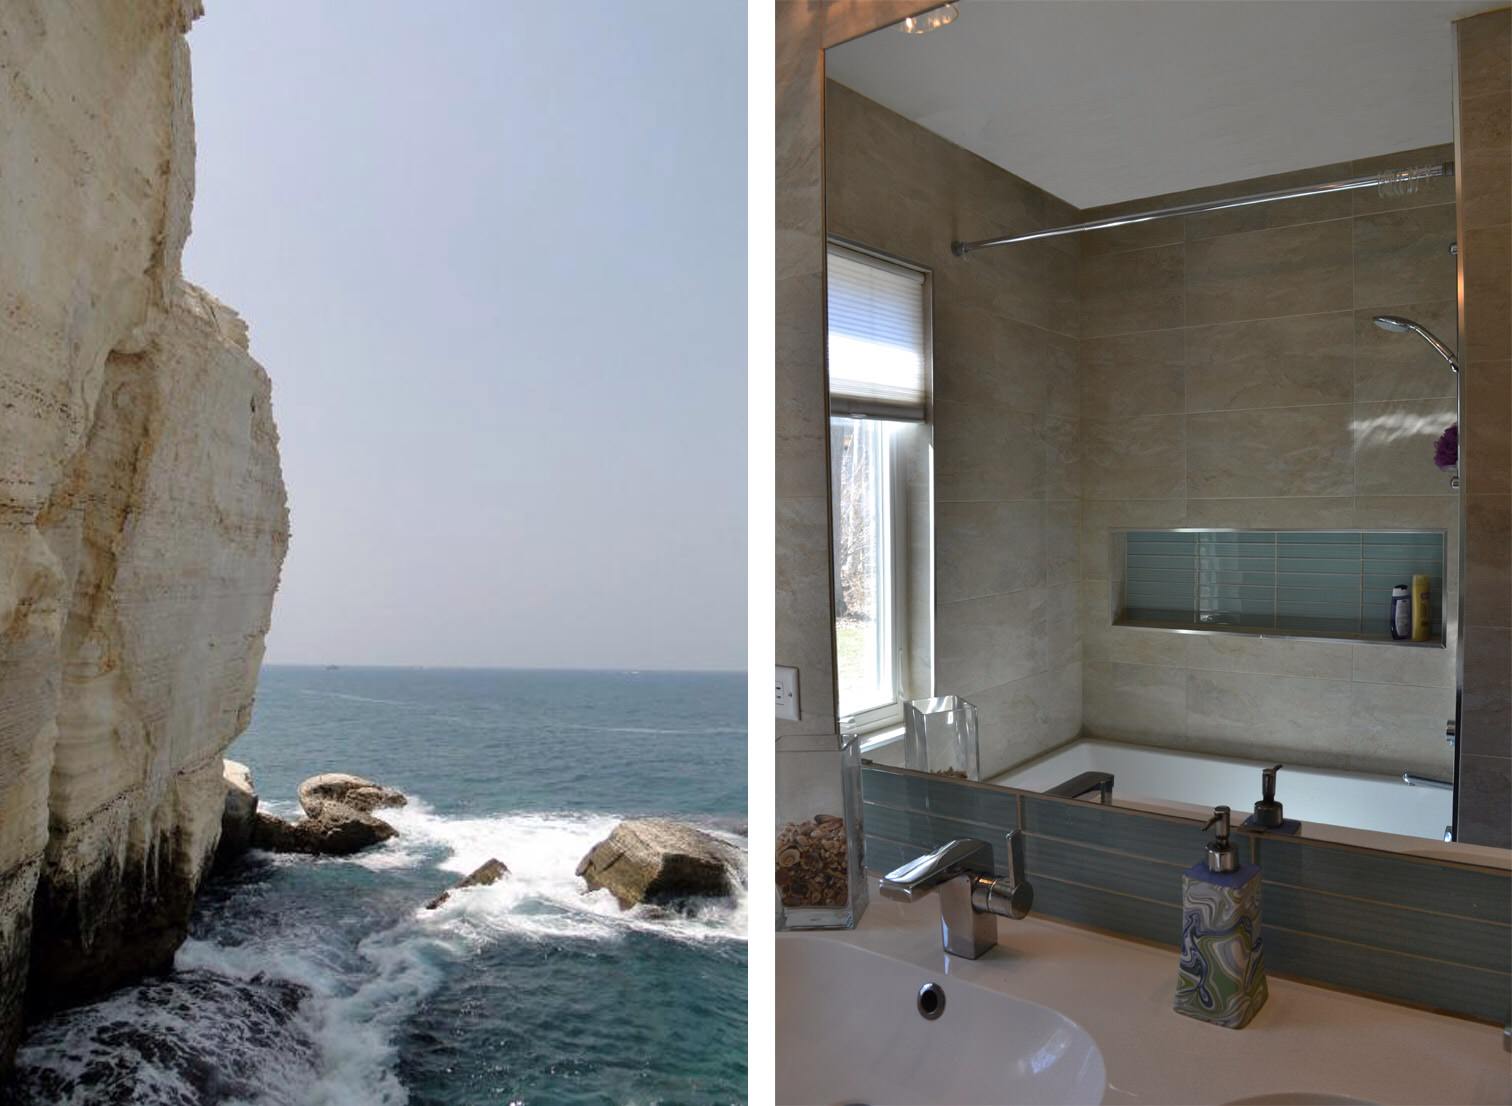 Bathroom - inspired by nature